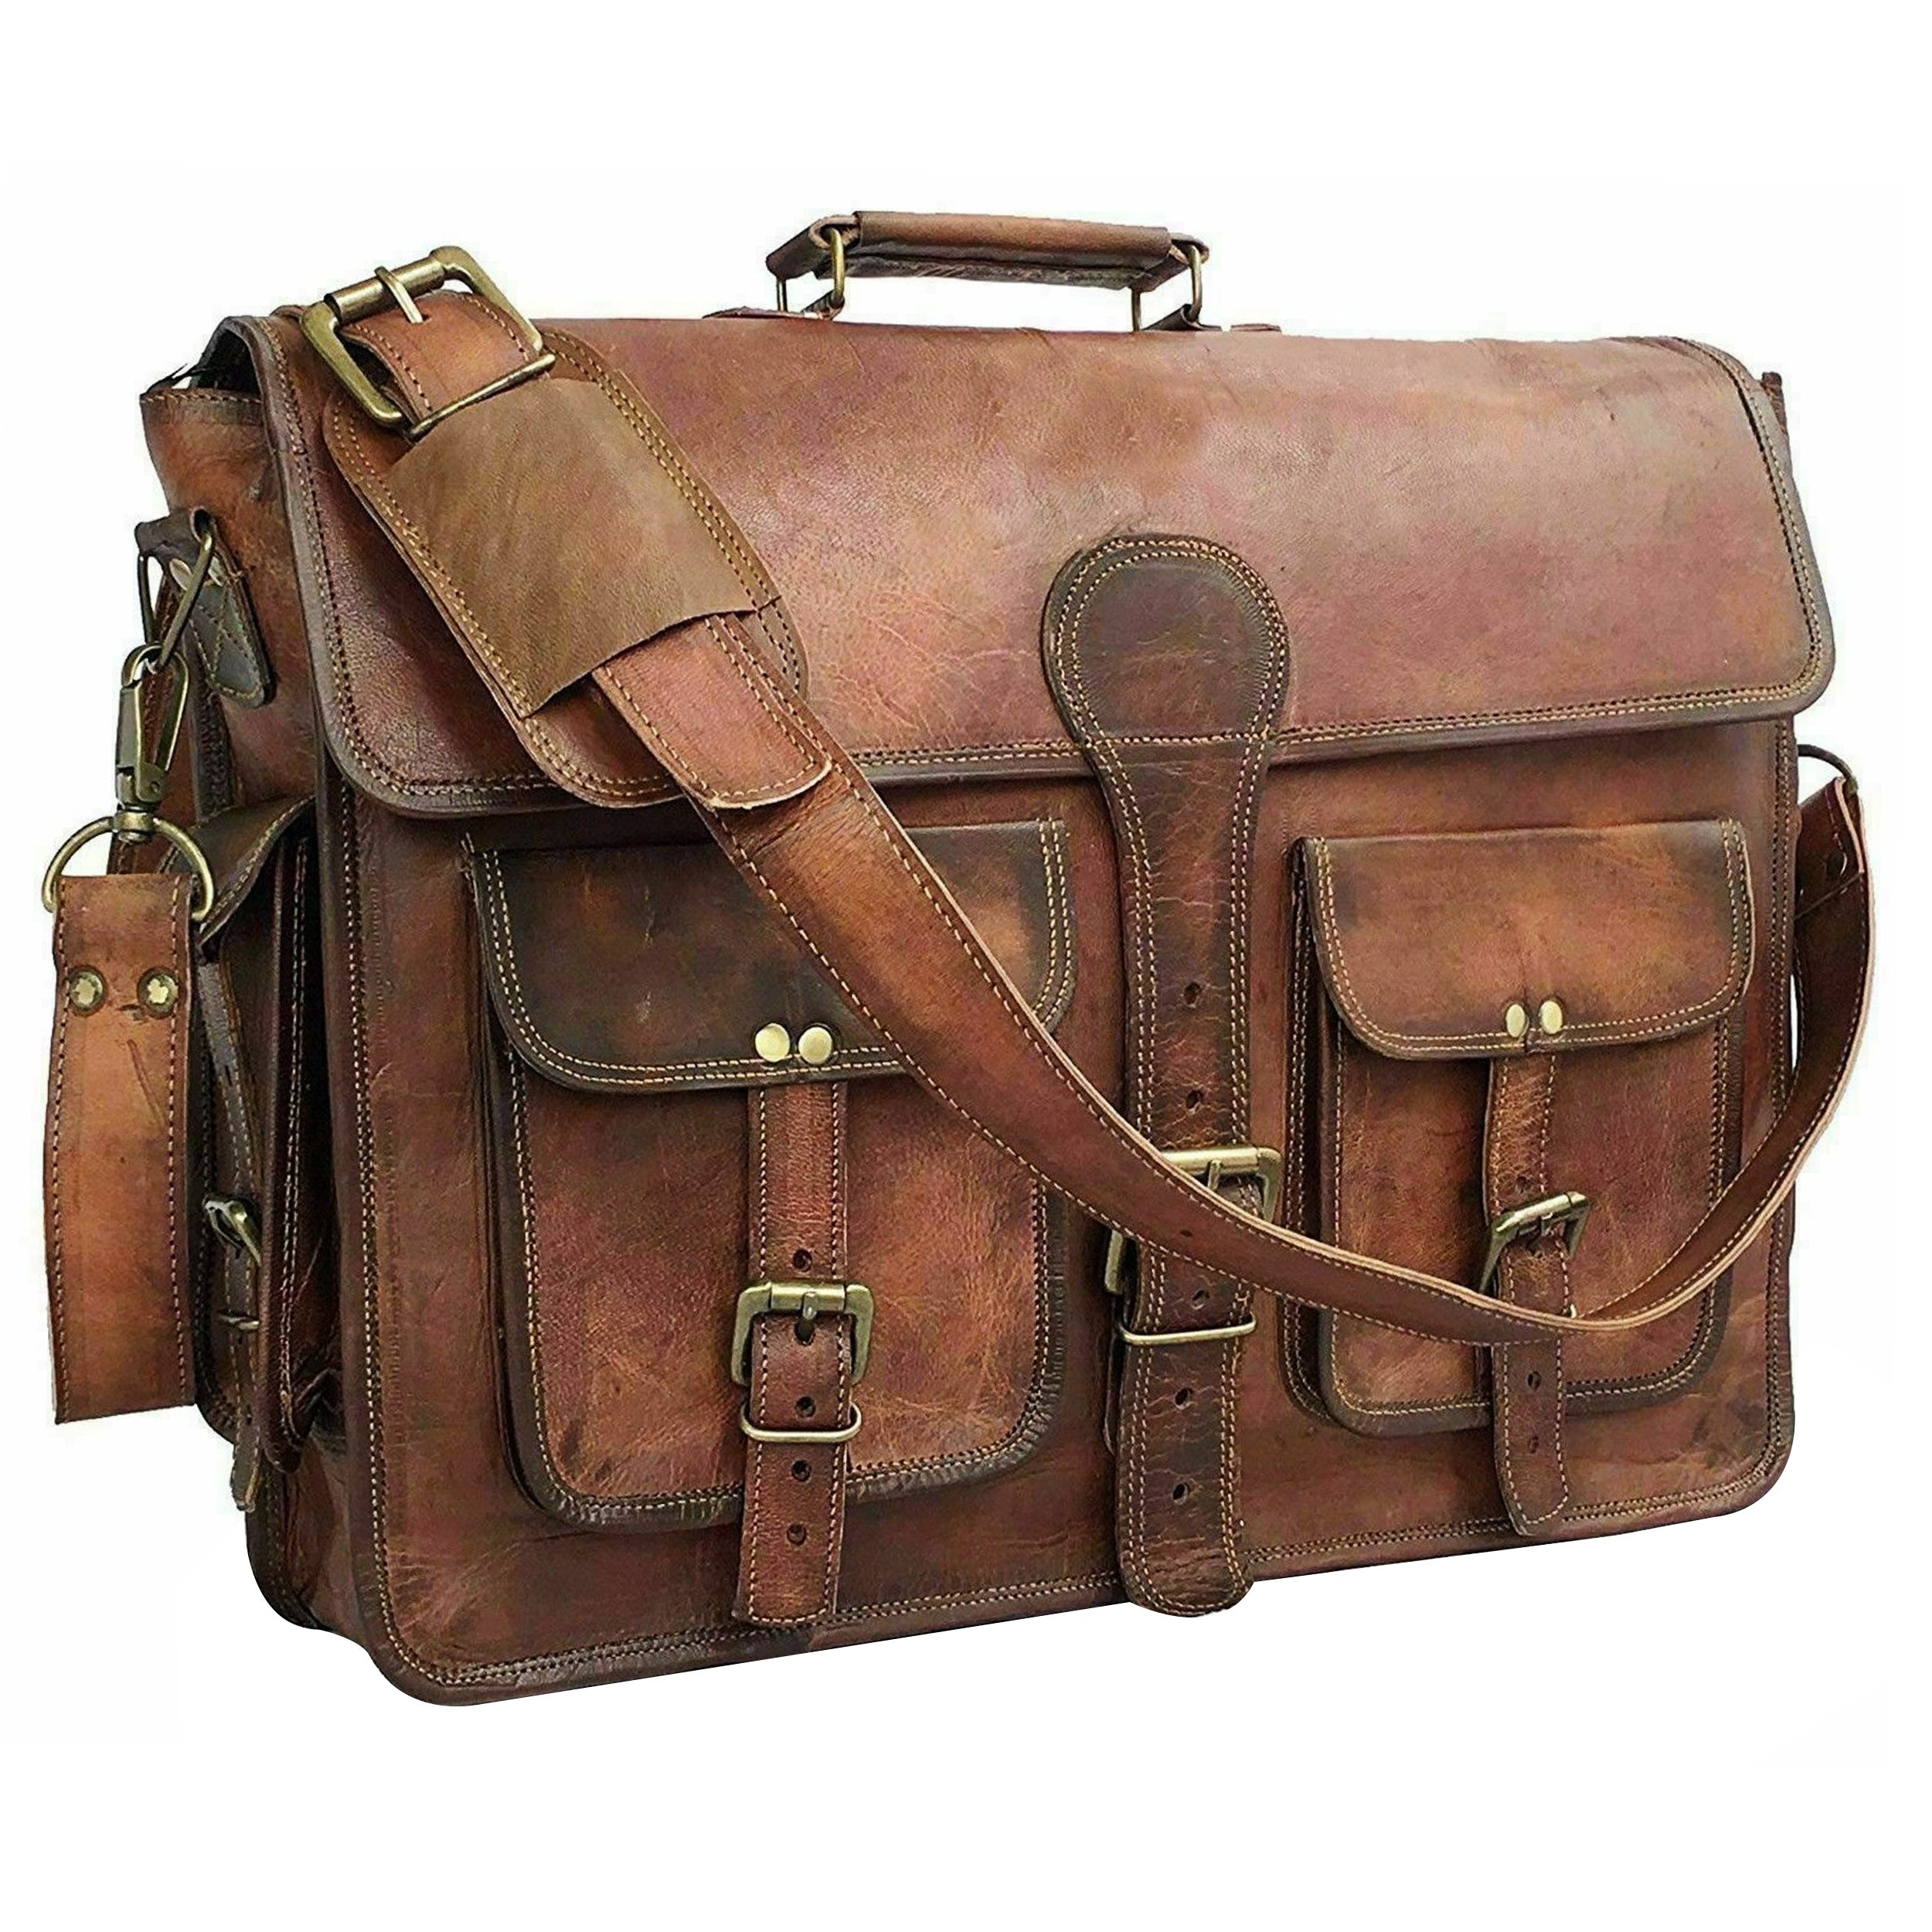 Hulsh Vintage Leather Laptop Bags for Men Full Grain Large Leather Messenger Bag for Men 18 Inches with Rustic Look Best Leather Brief